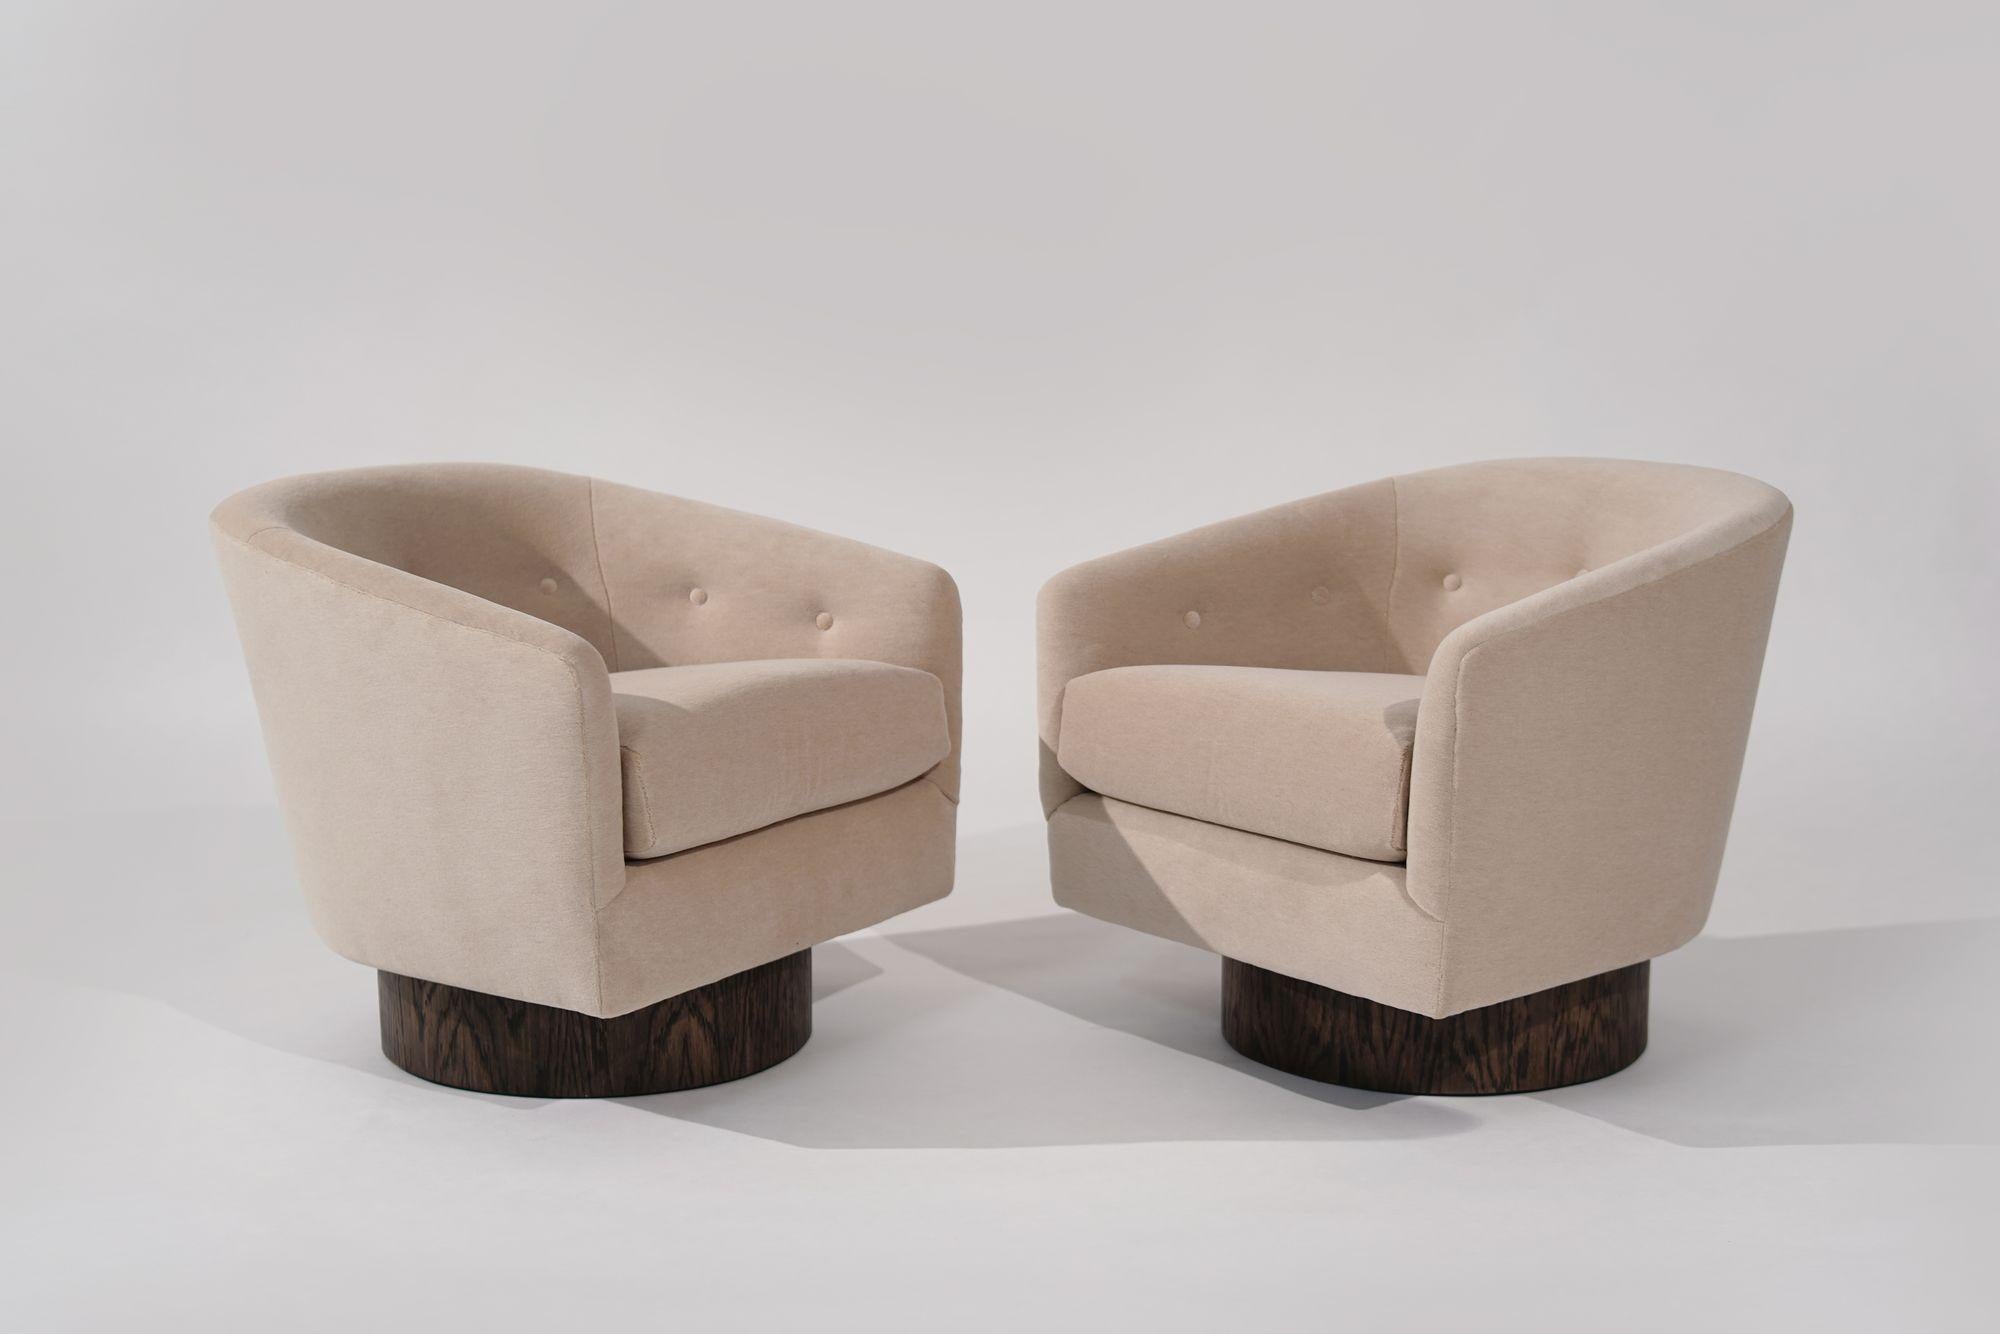 Elevate your space with this set of Milo Baughman swivel chairs from the 1970s. Fully restored and reupholstered in natural mohair, these chairs exude luxury. The oak base adds a touch of warmth and sophistication. Perfect for any modern interior